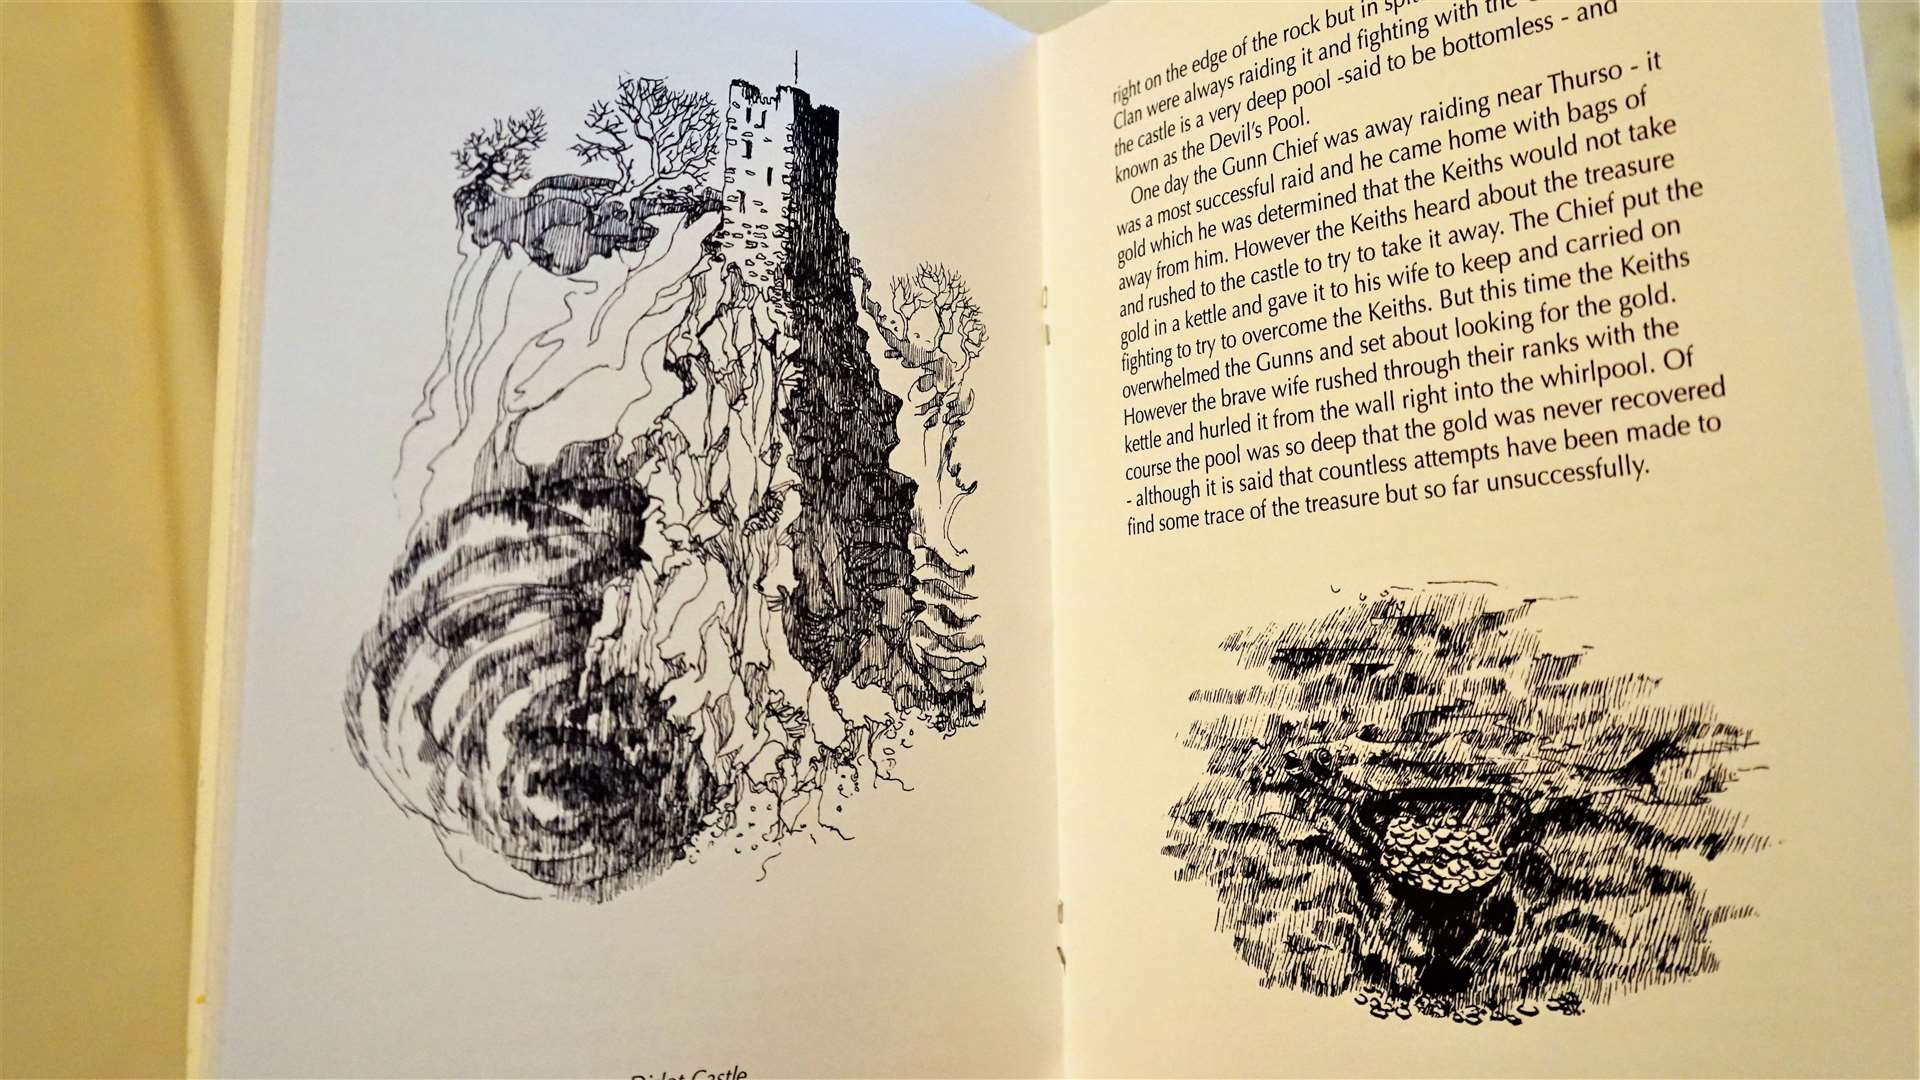 Some of Barbara's illustrations in the book.